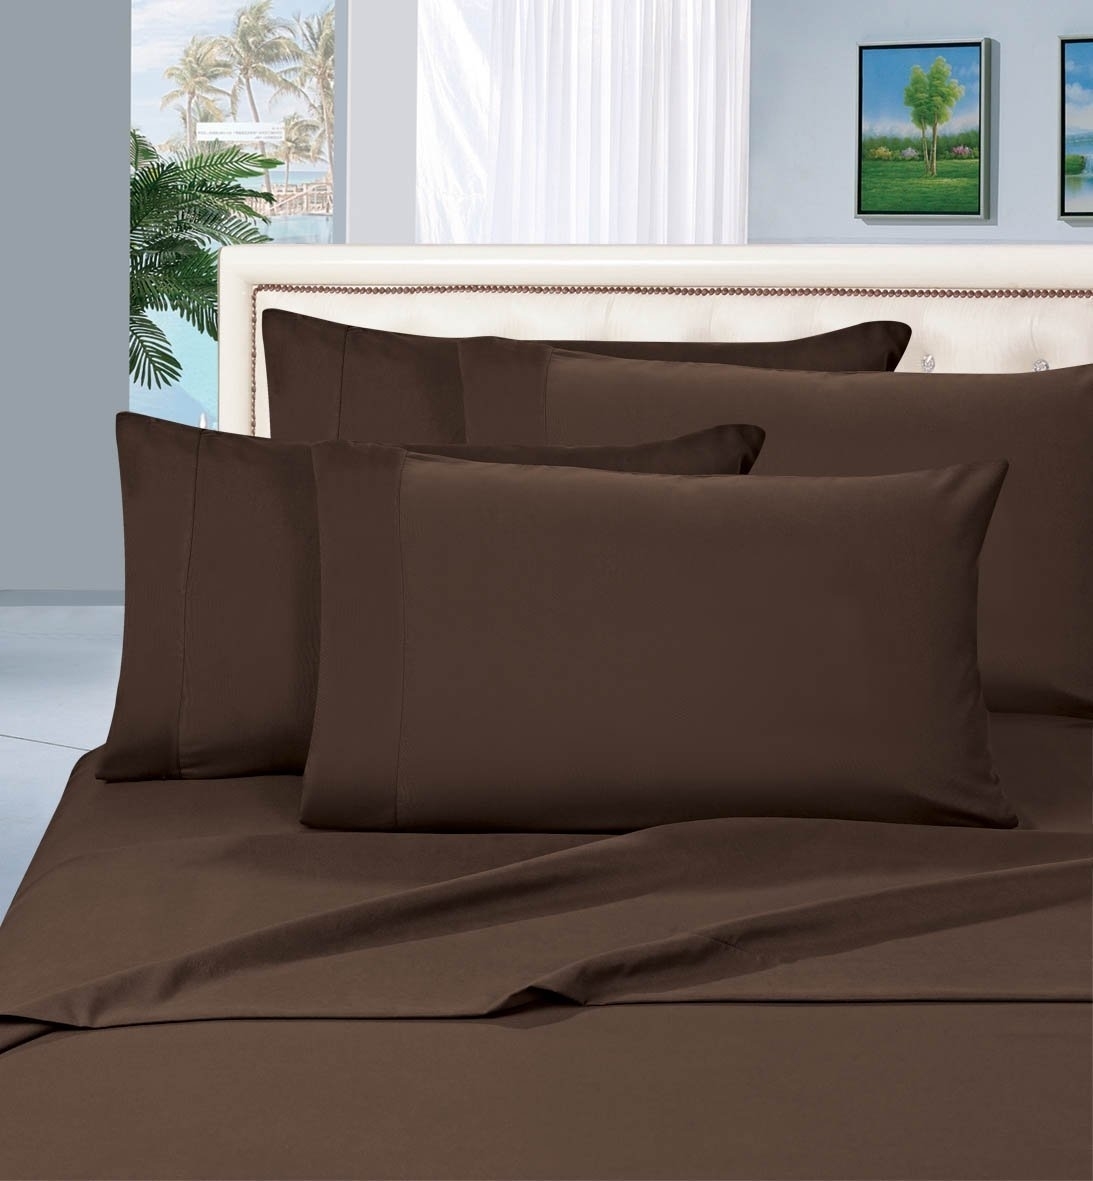 Elegant Comfort 1500 Series Wrinkle Resistant Egyptian Quality Hypoallergenic Ultra Soft Luxury 4-piece Bed Sheet Set, Full, Chocolate